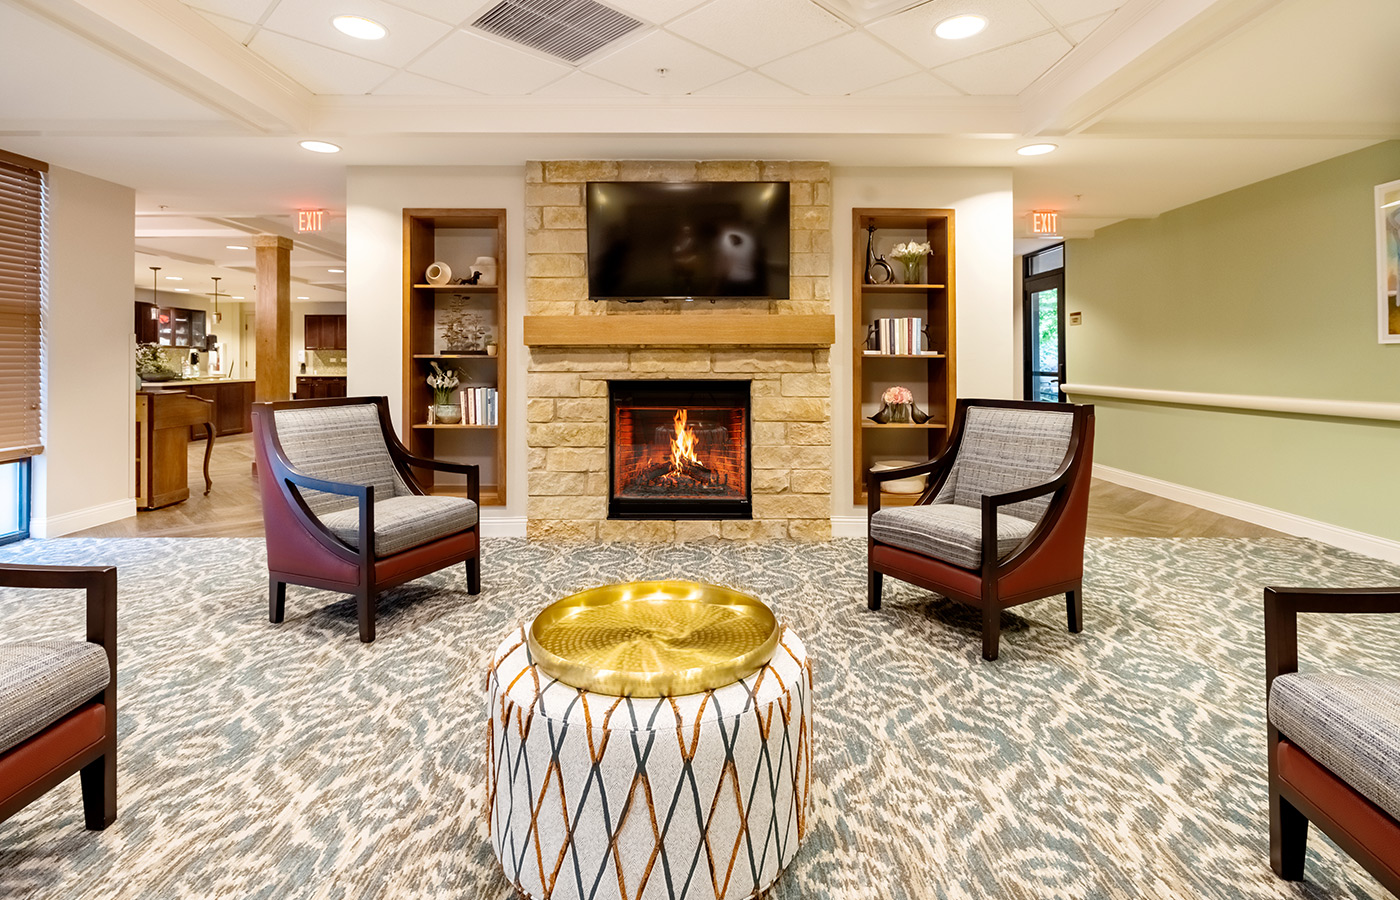 A lounge area with seating and a fireplace.